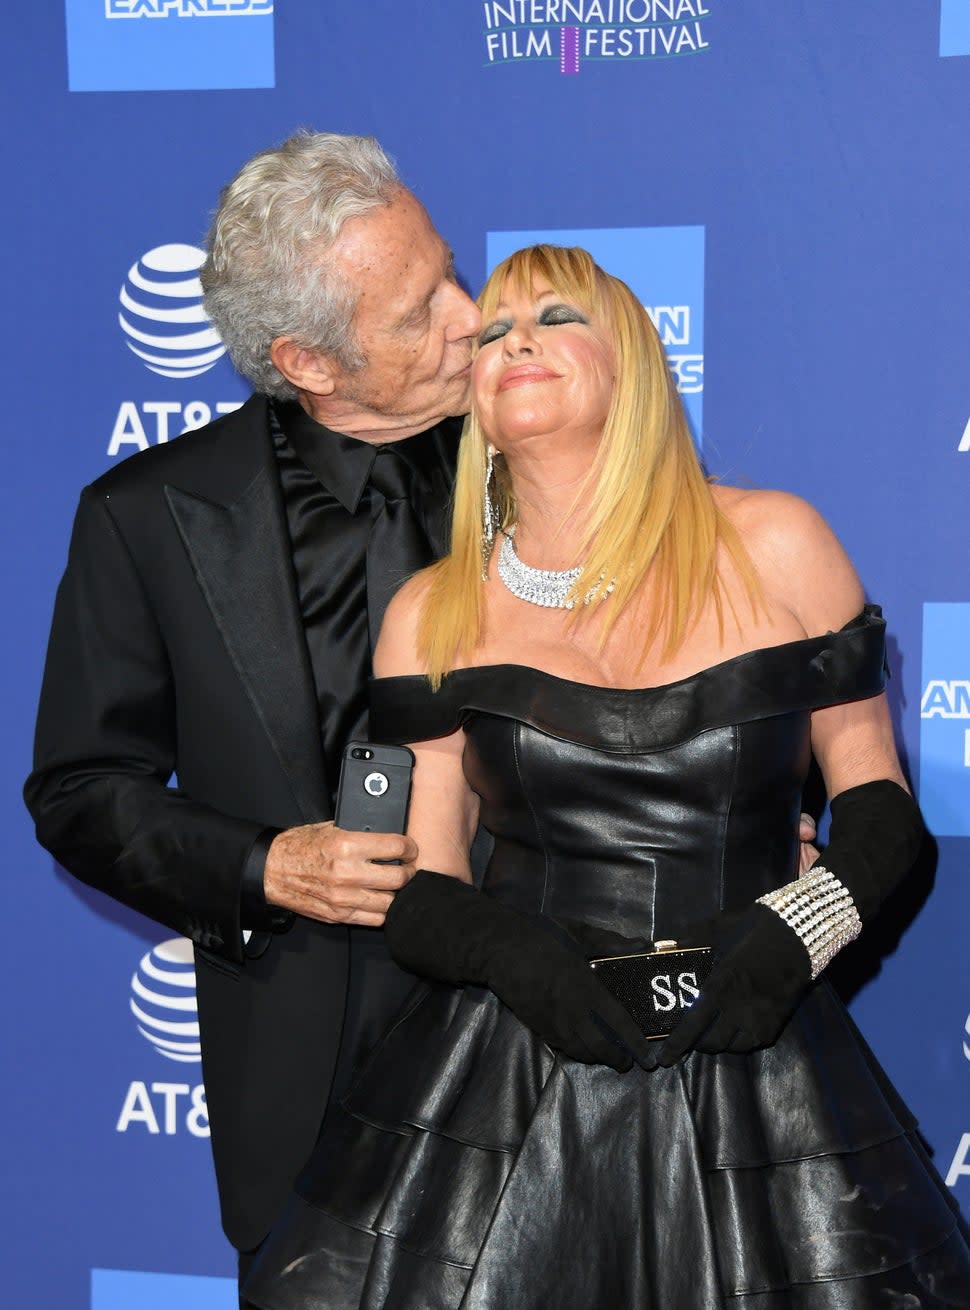 Alan Hamel wrote one final poem to Suzanne Somers before her death